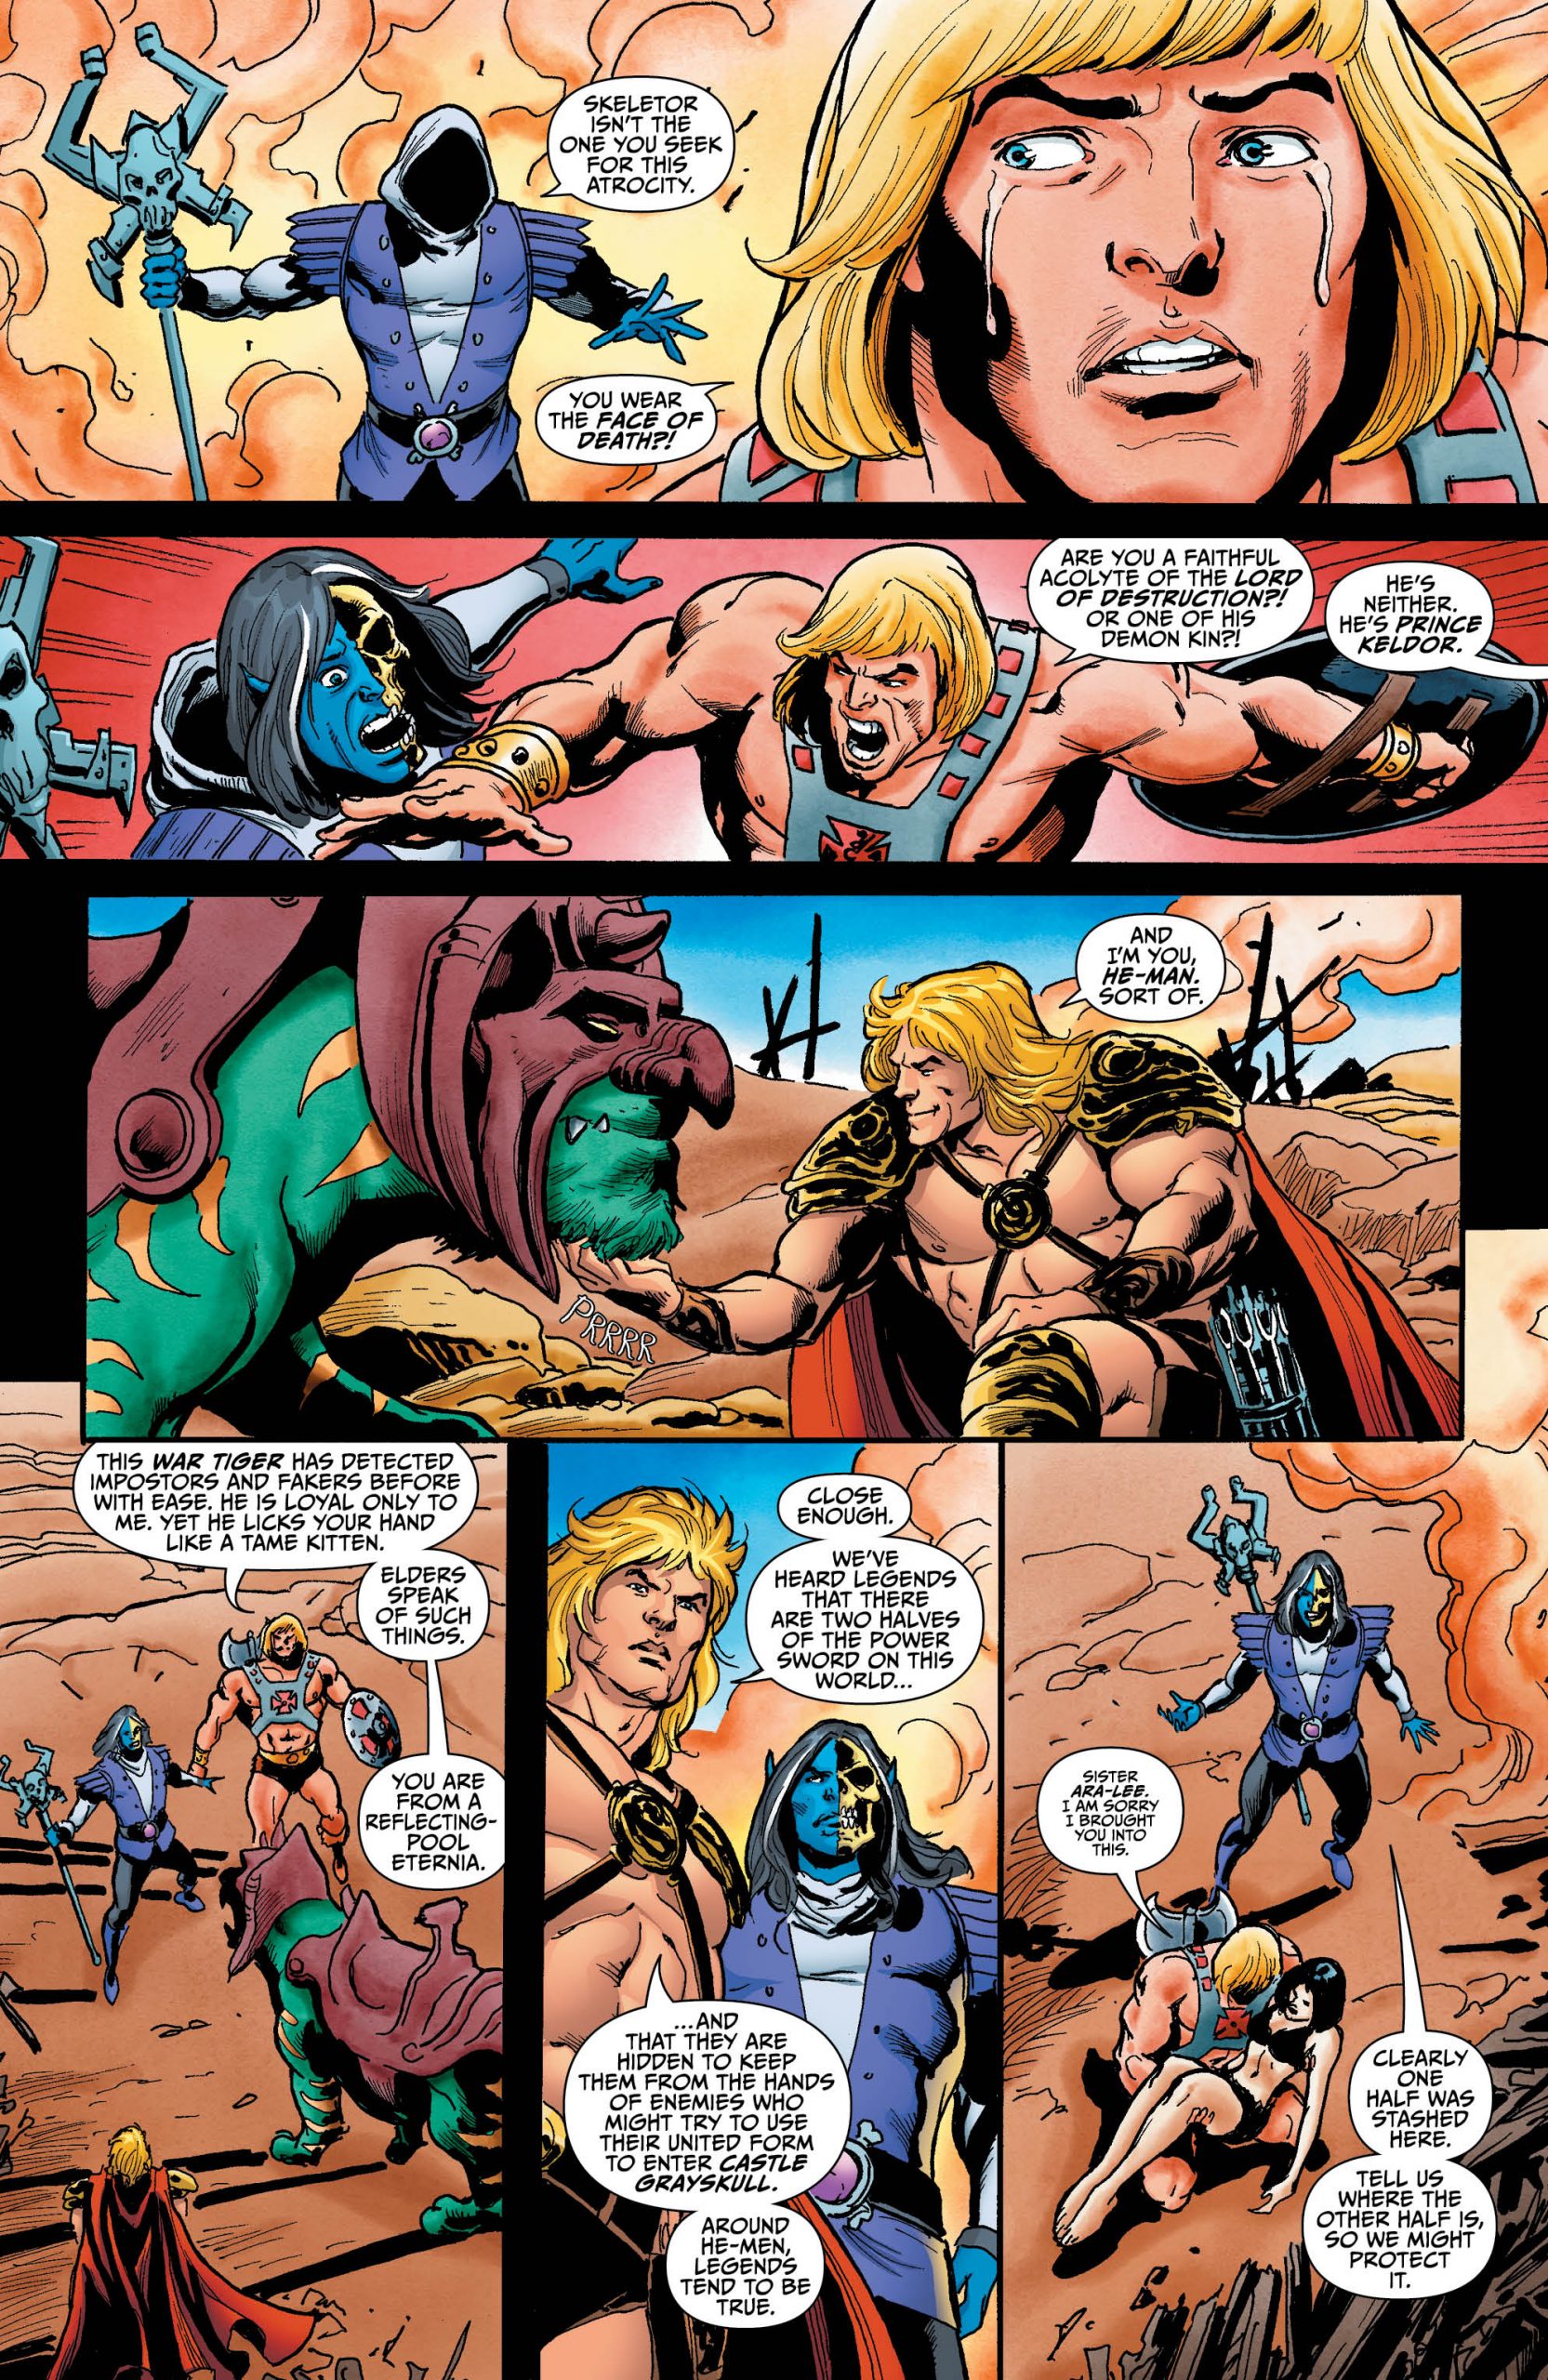 He-Man and the Masters of the Multiverse #5